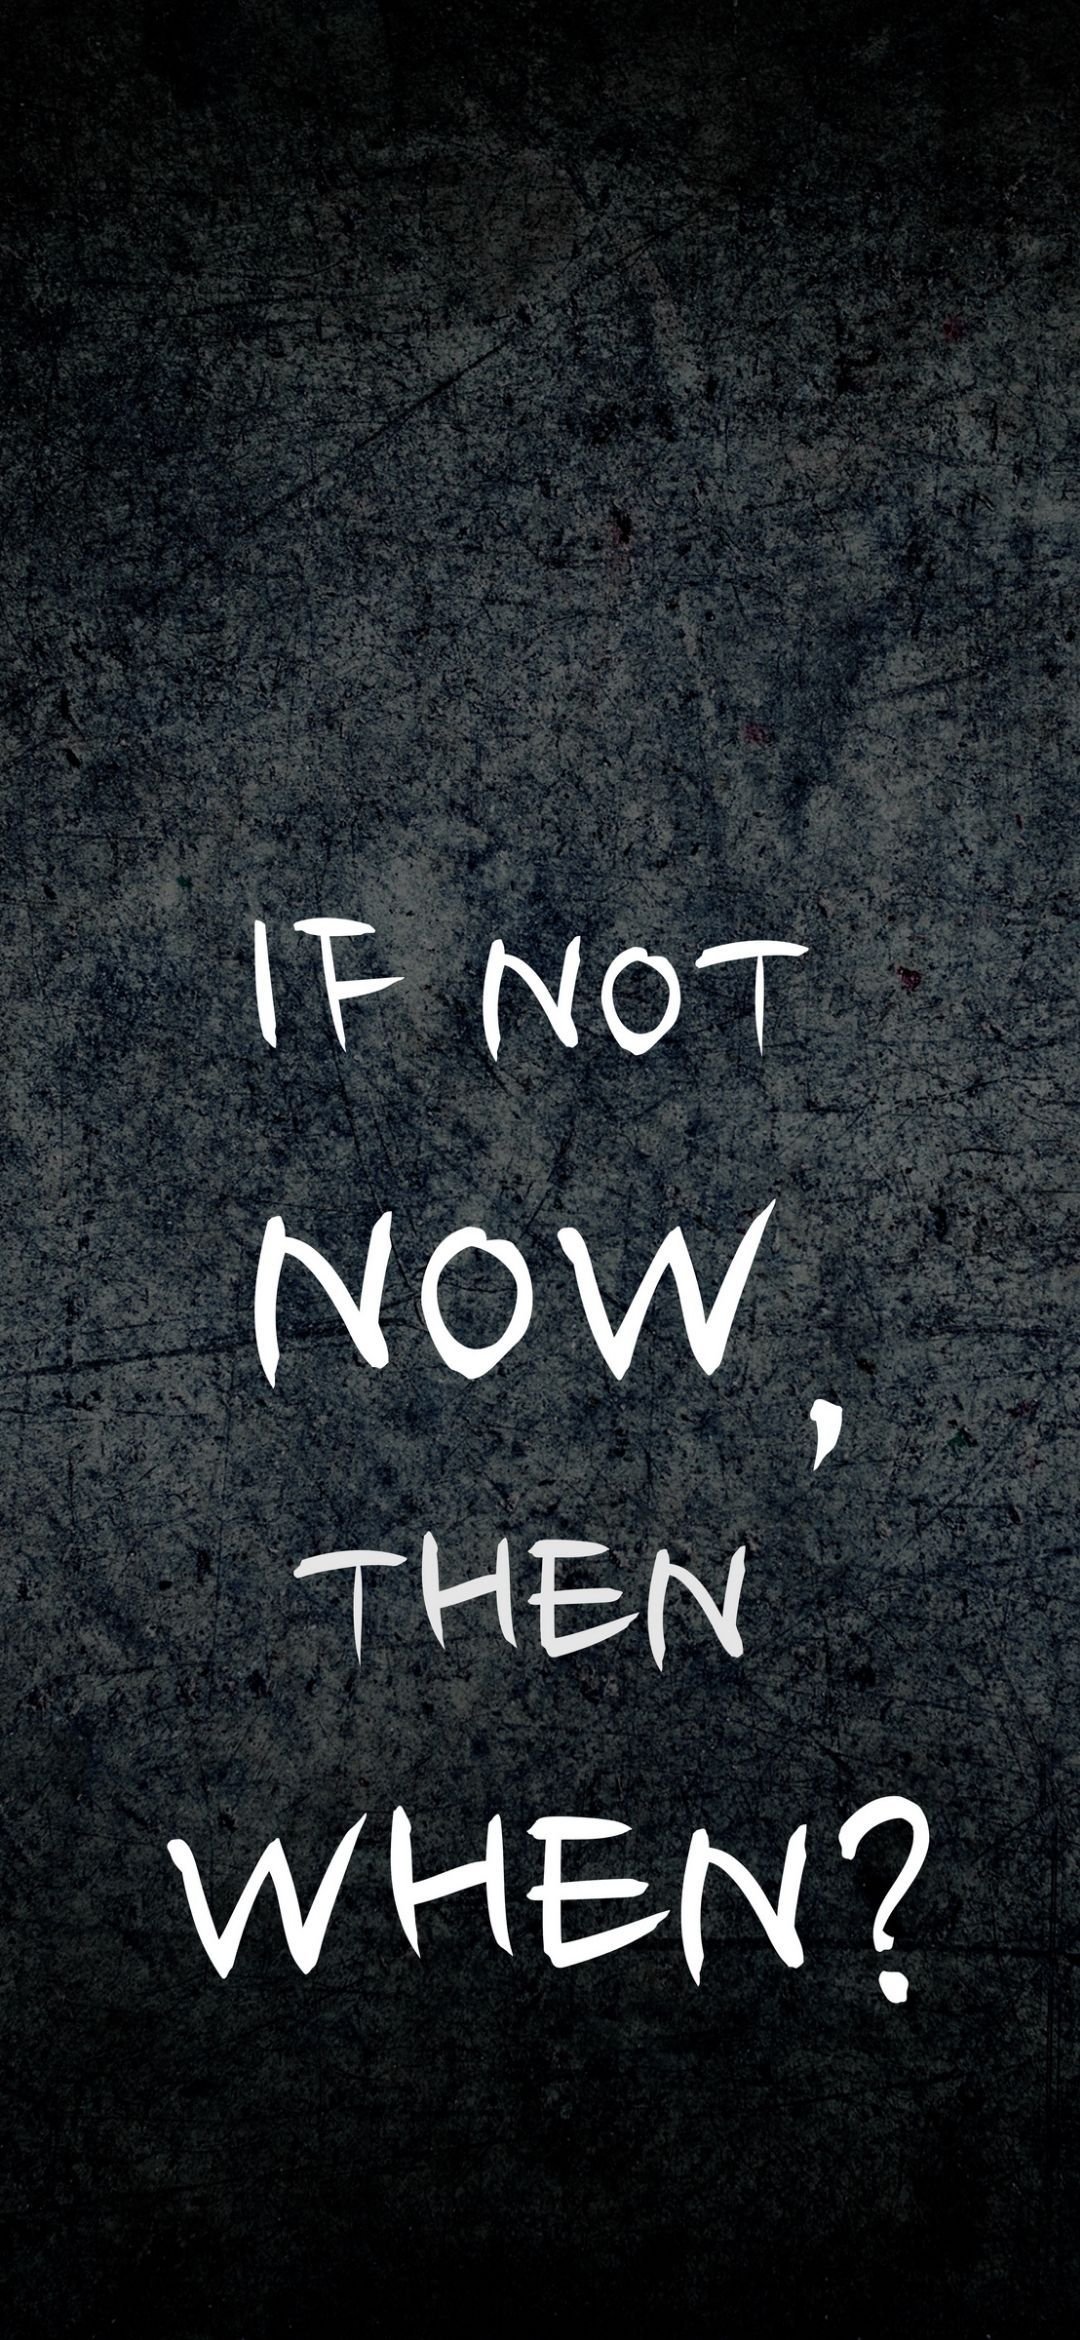 If not now